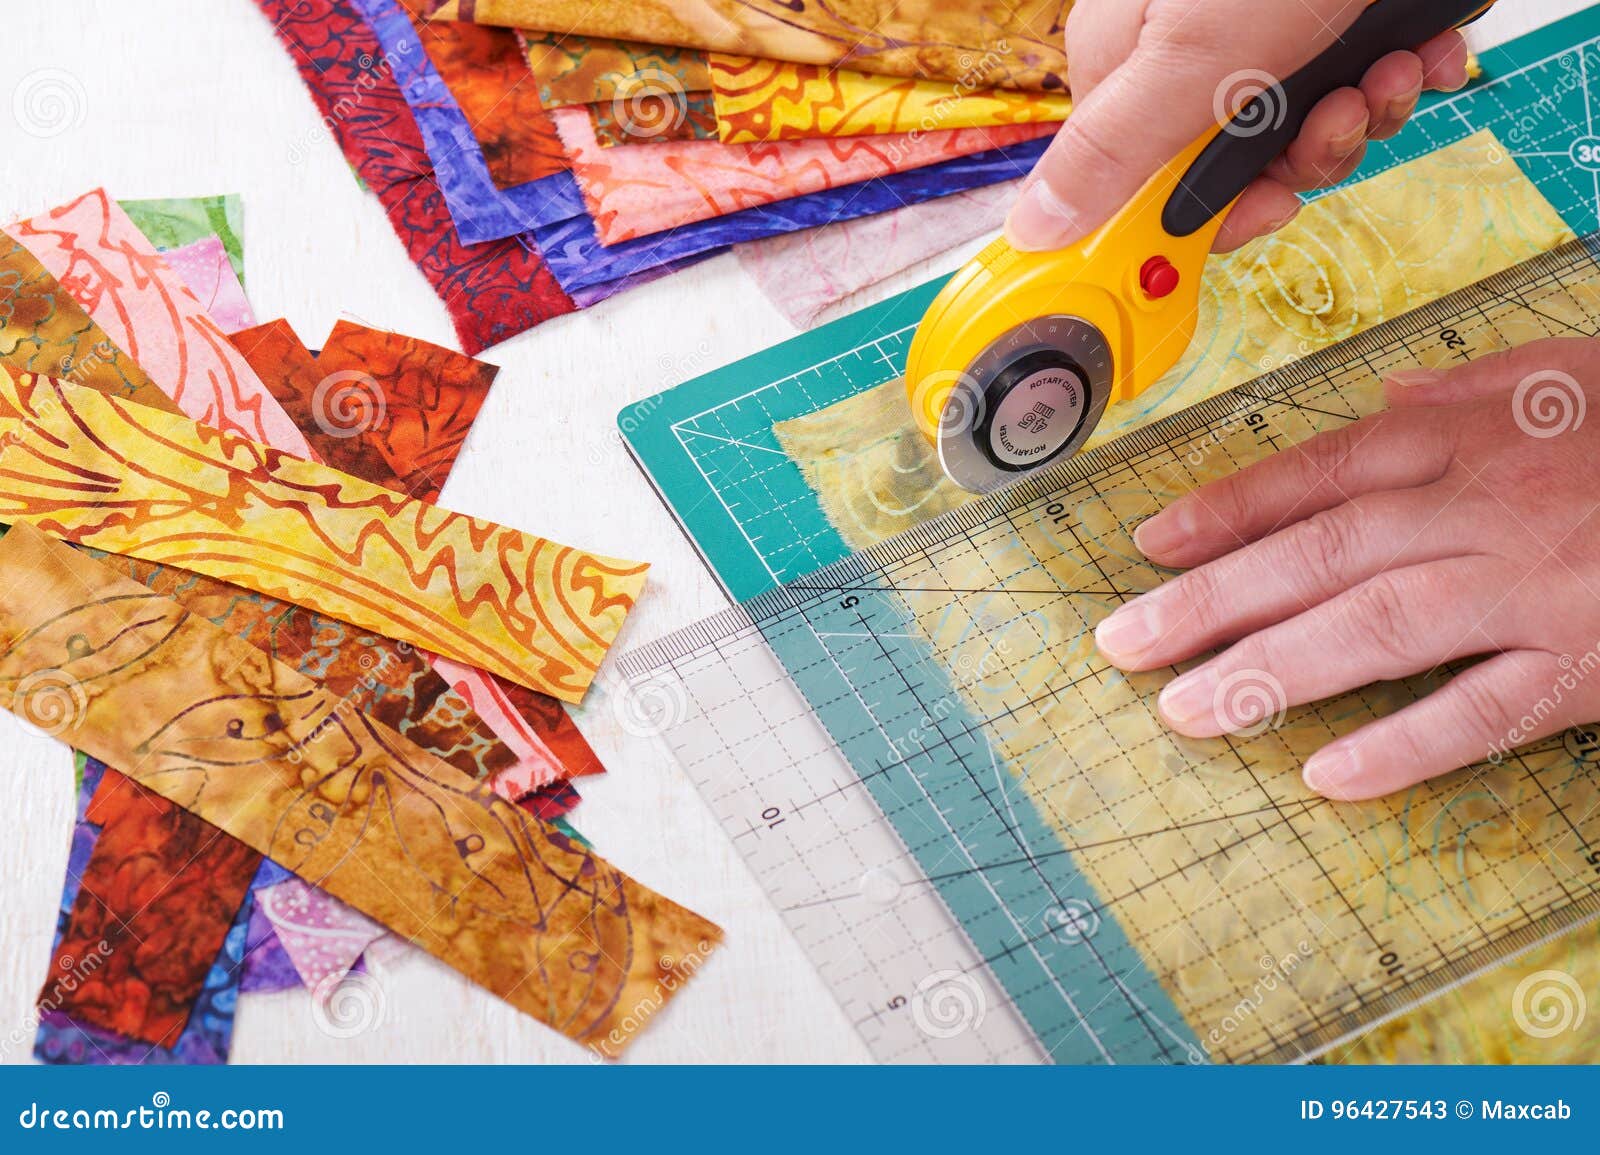 Download Process Cutting Fabric Pieces By Rotary Cutter On Mat Using Ruler Stock Image - Image of cutting ...